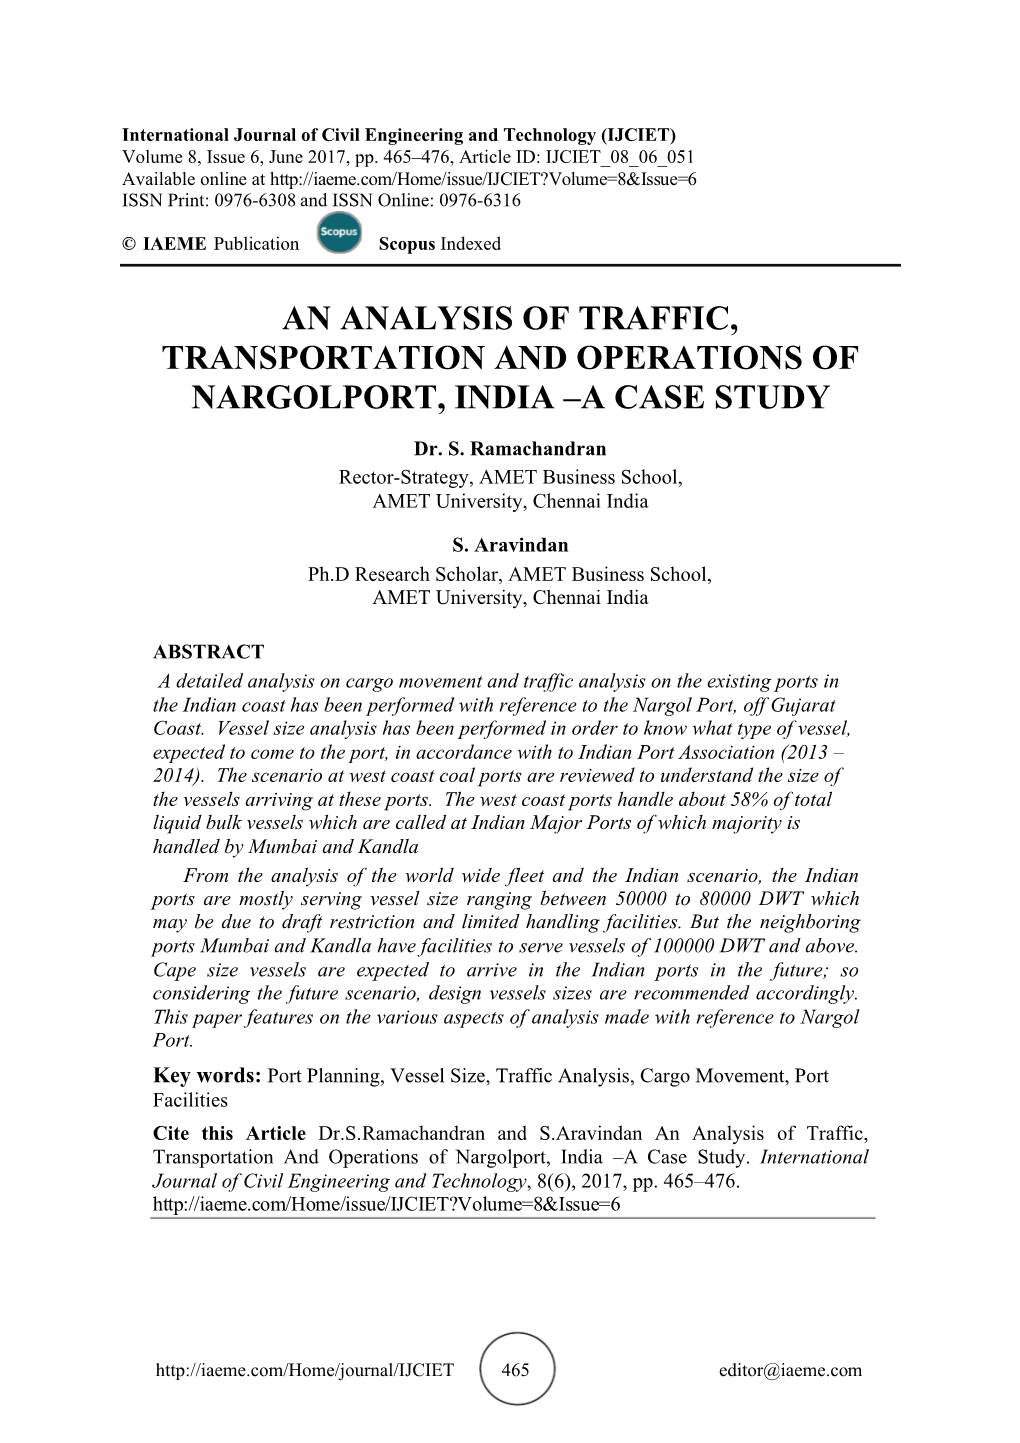 An Analysis of Traffic, Transportation and Operations of Nargolport, India –A Case Study